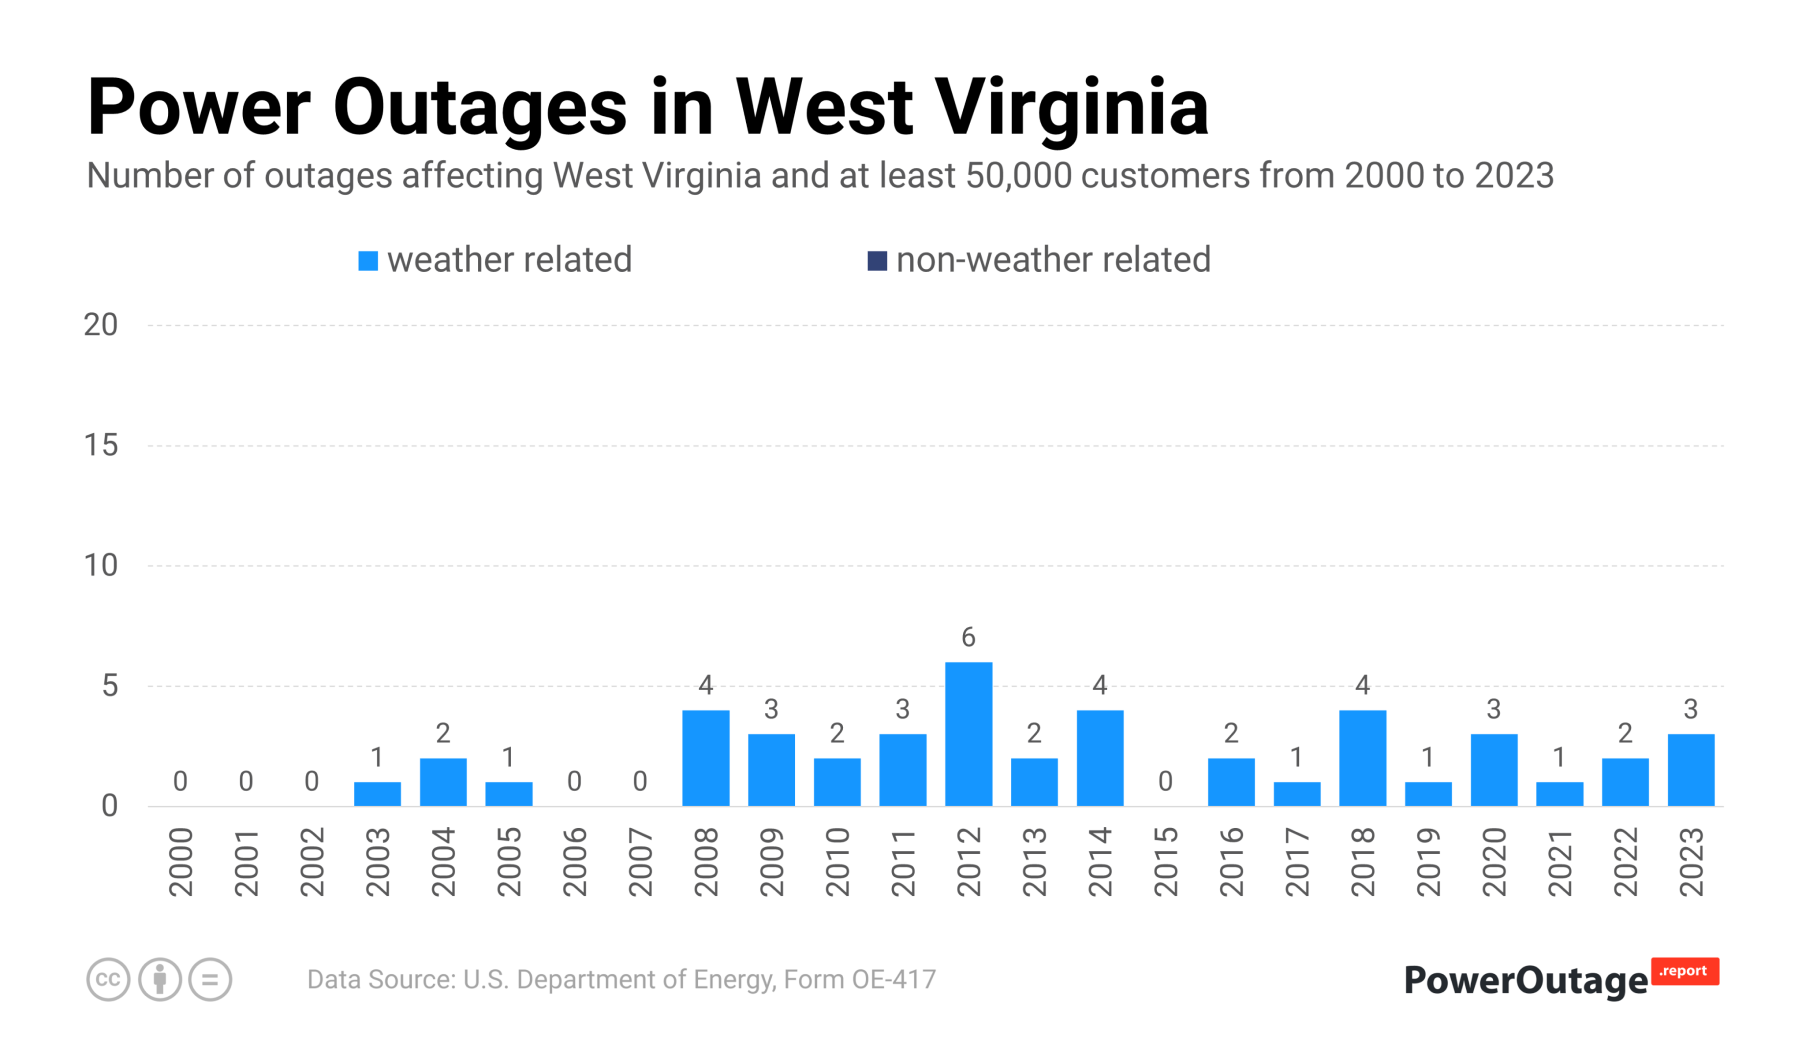 West Virginia Power Outage Statistics (2000 - 2021)